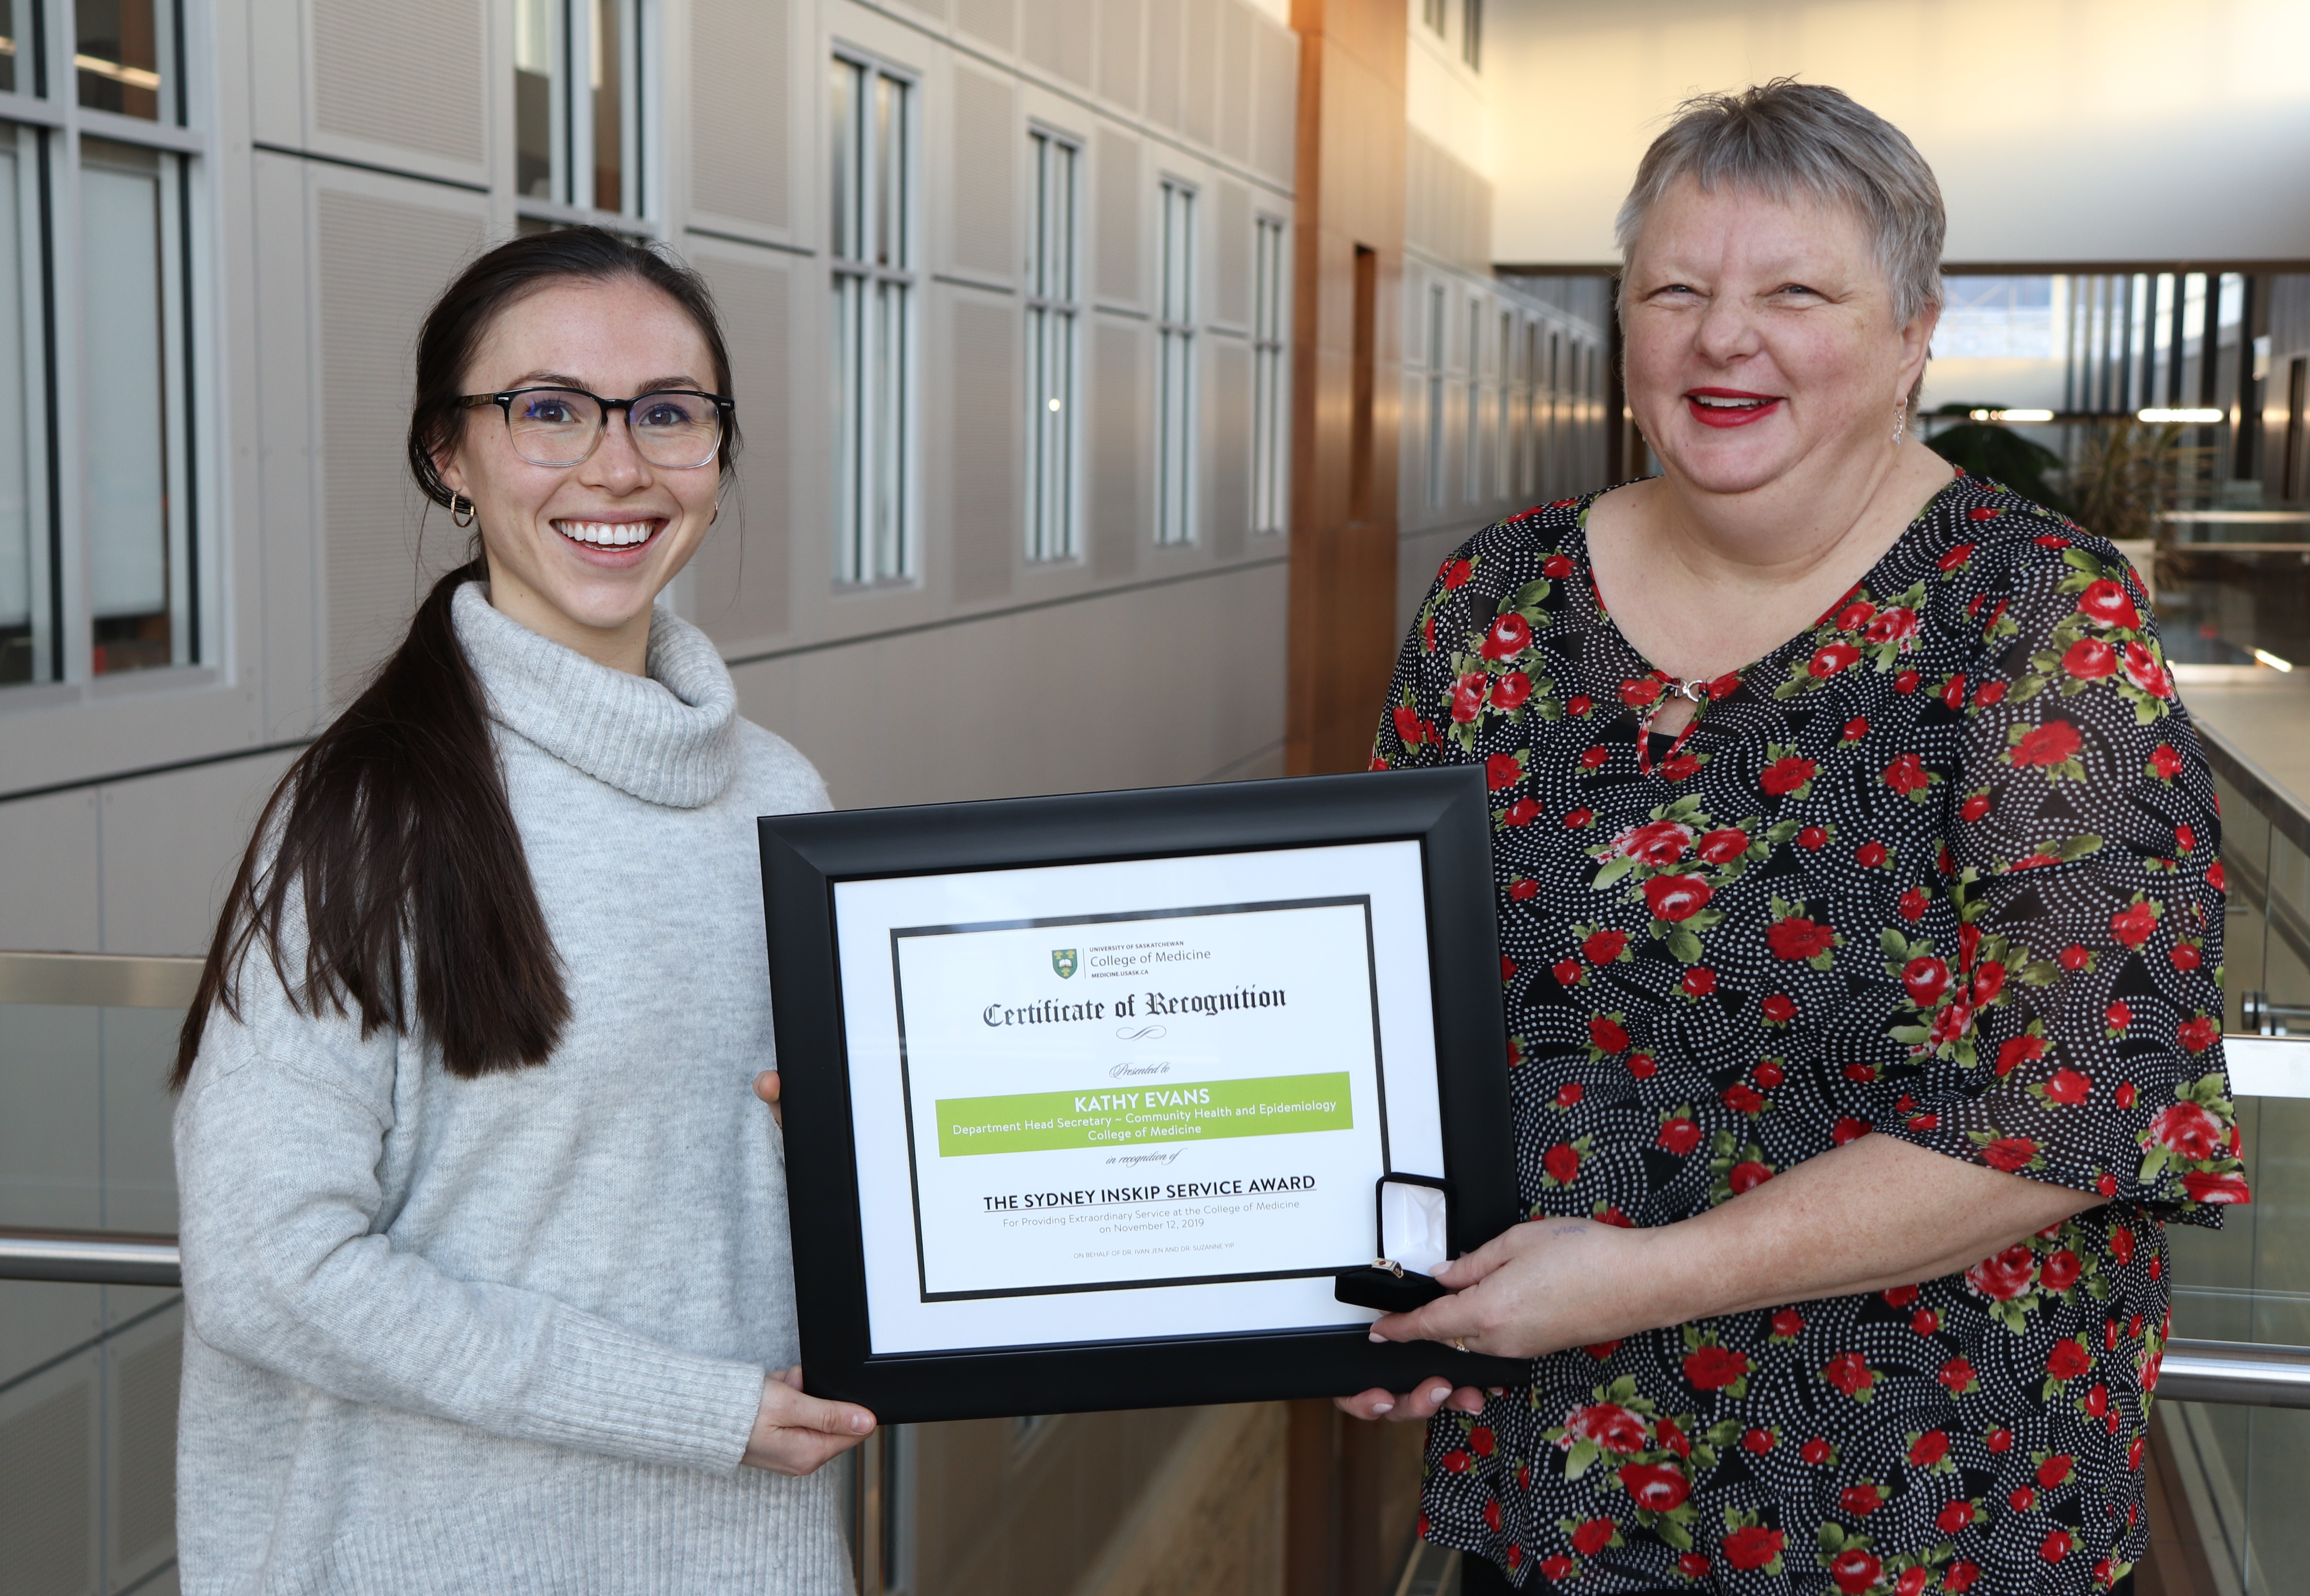 Kathy Evans (right), 2019 Sydney Inskip Service Award recipient with Steph Hart, donor relations and leadership giving officer